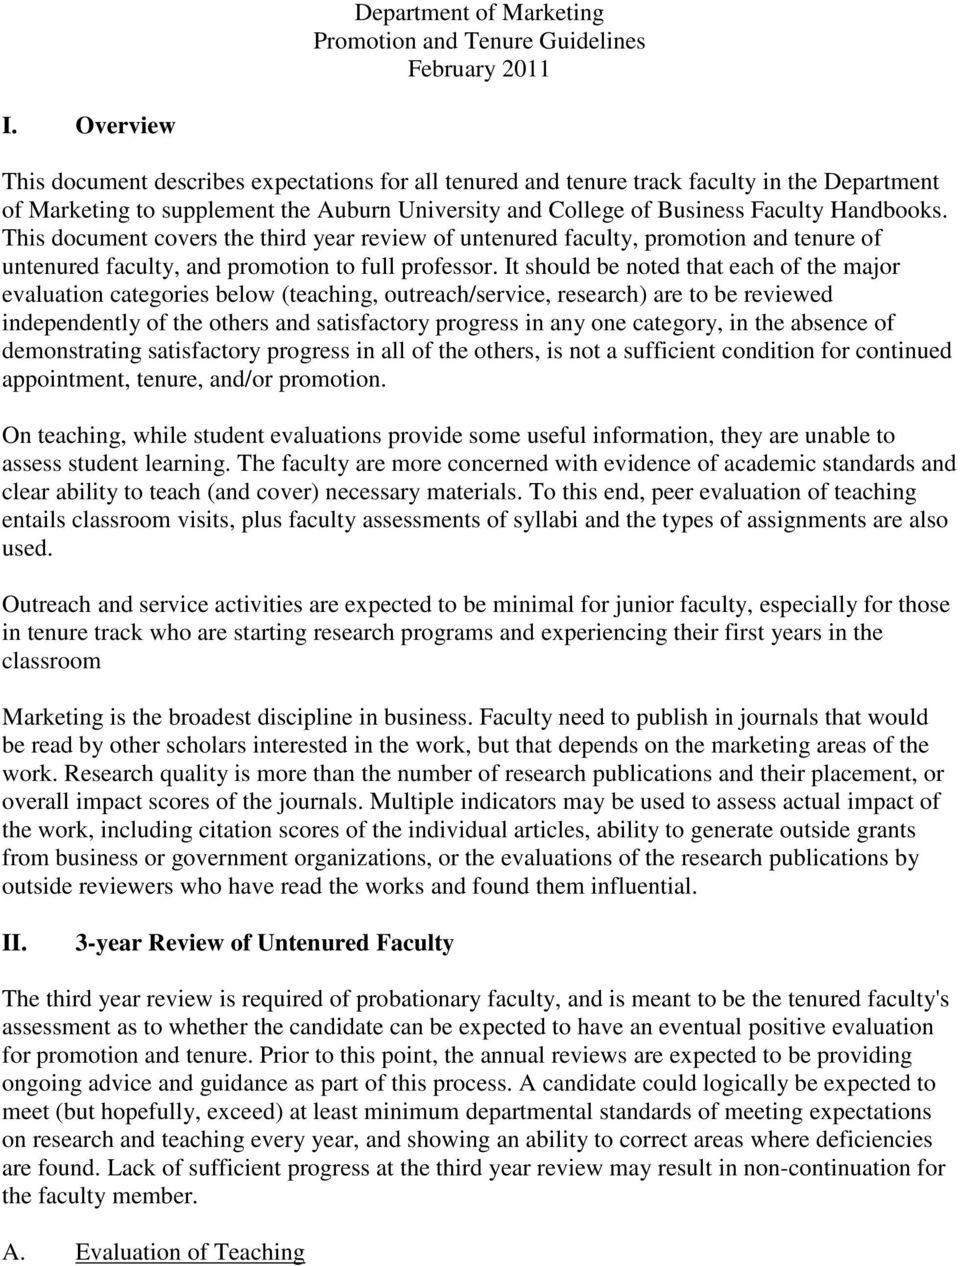 This document covers the third year review of untenured faculty, promotion and tenure of untenured faculty, and promotion to full professor.